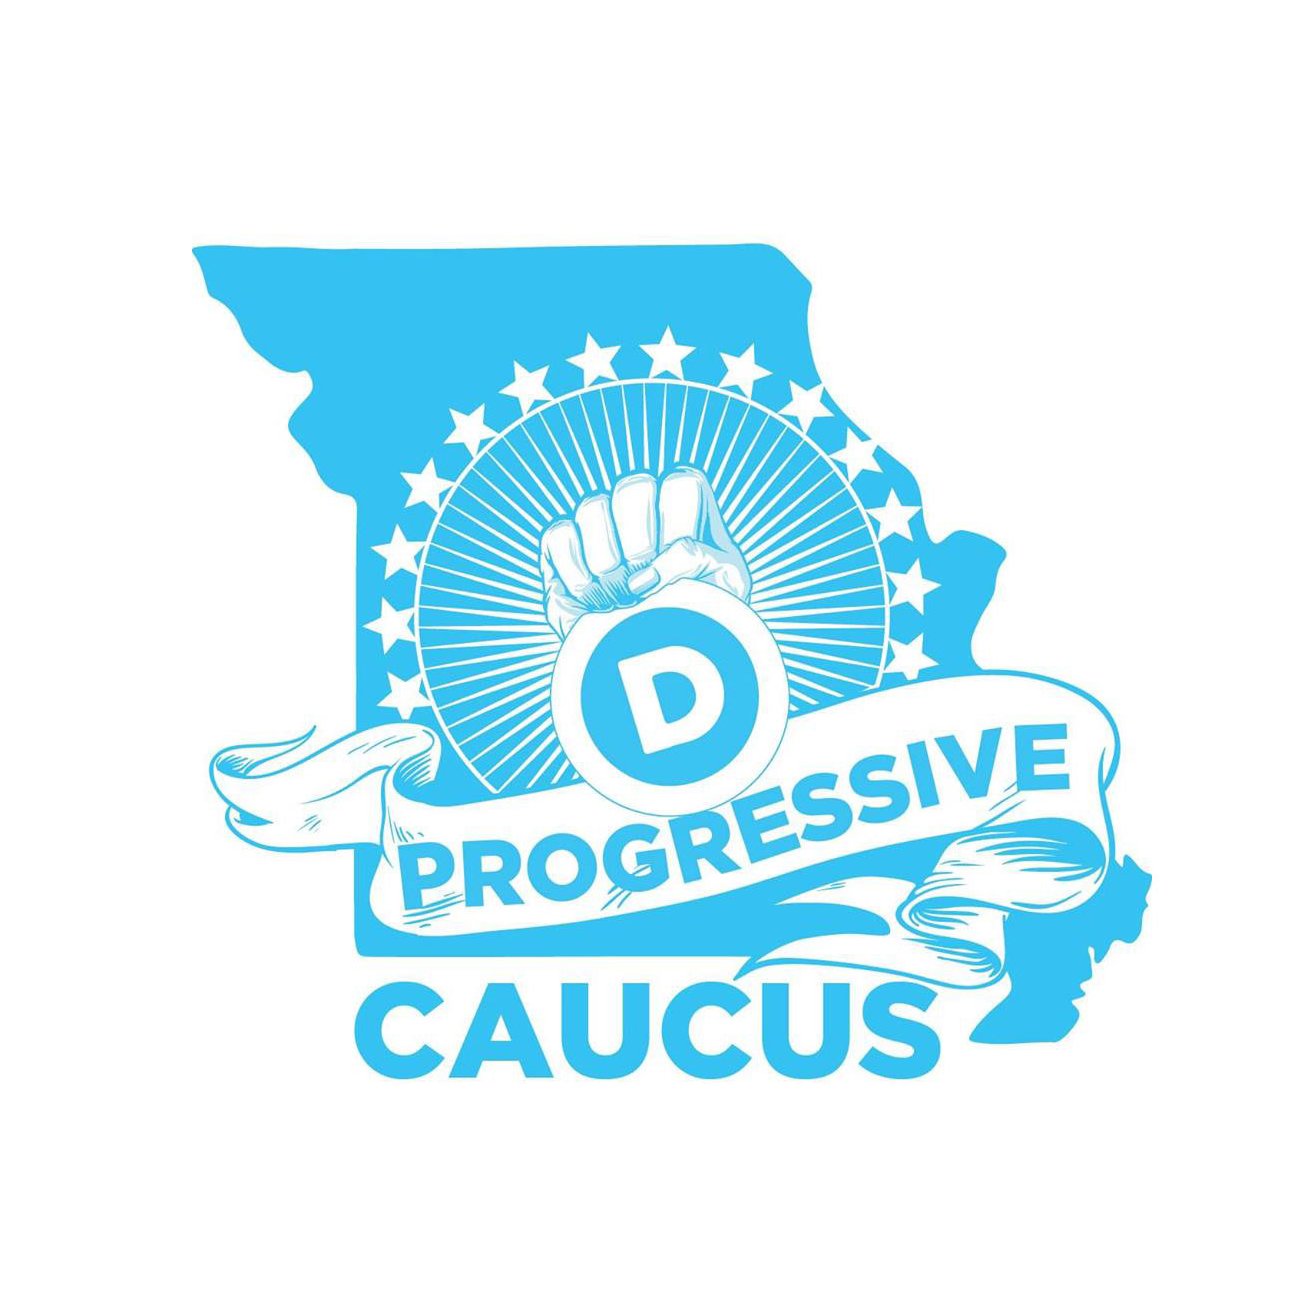 The MDP Progressive Caucus supports progressive candidates and legislation to address issues such as economic equality, climate change, and universal healthcare